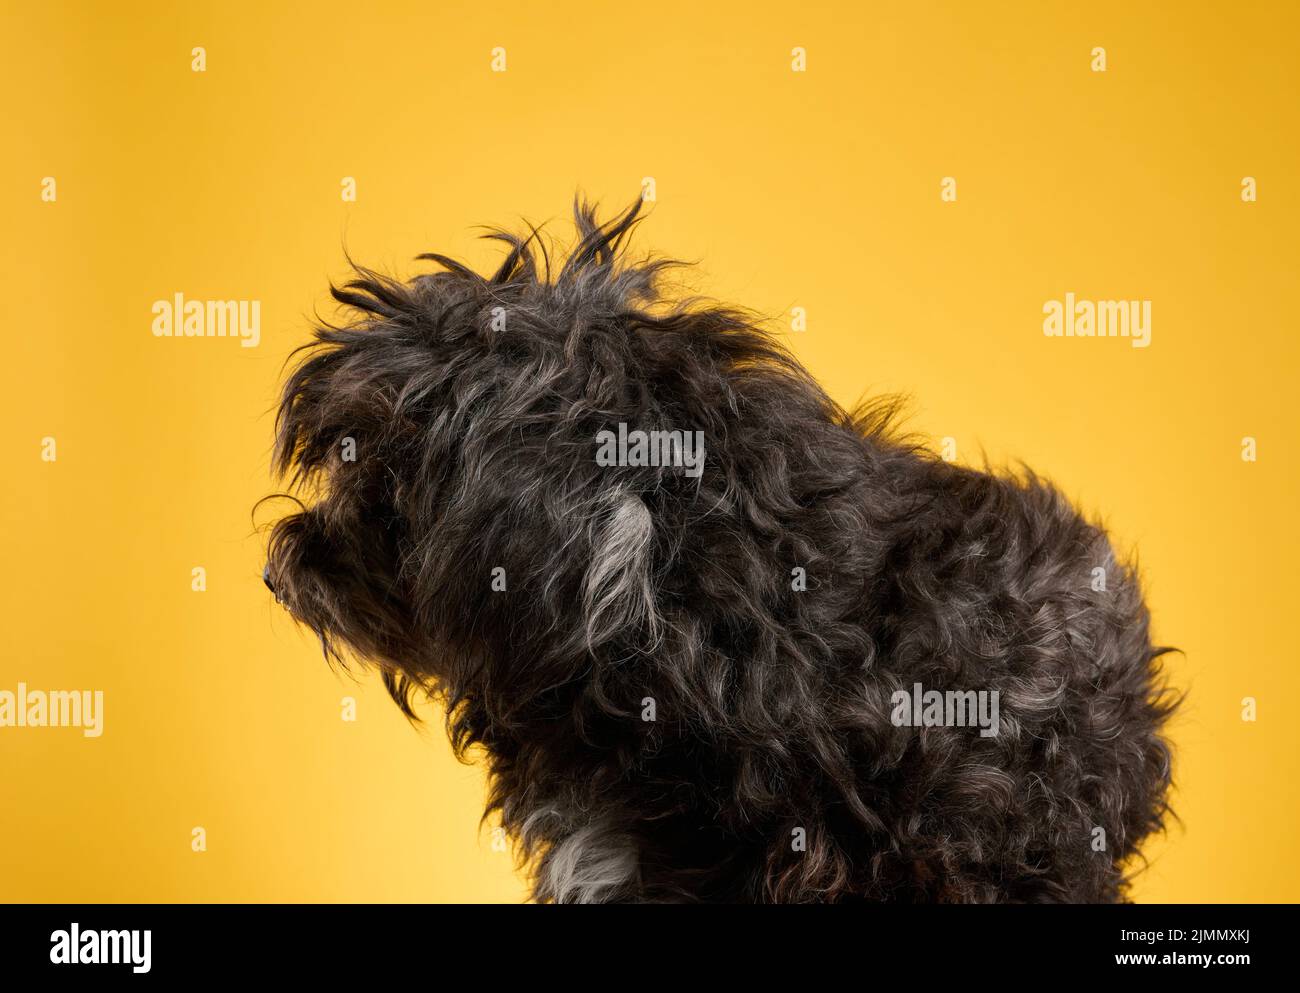 Small black furry dog sits on a yellow background and looks ahead Stock Photo